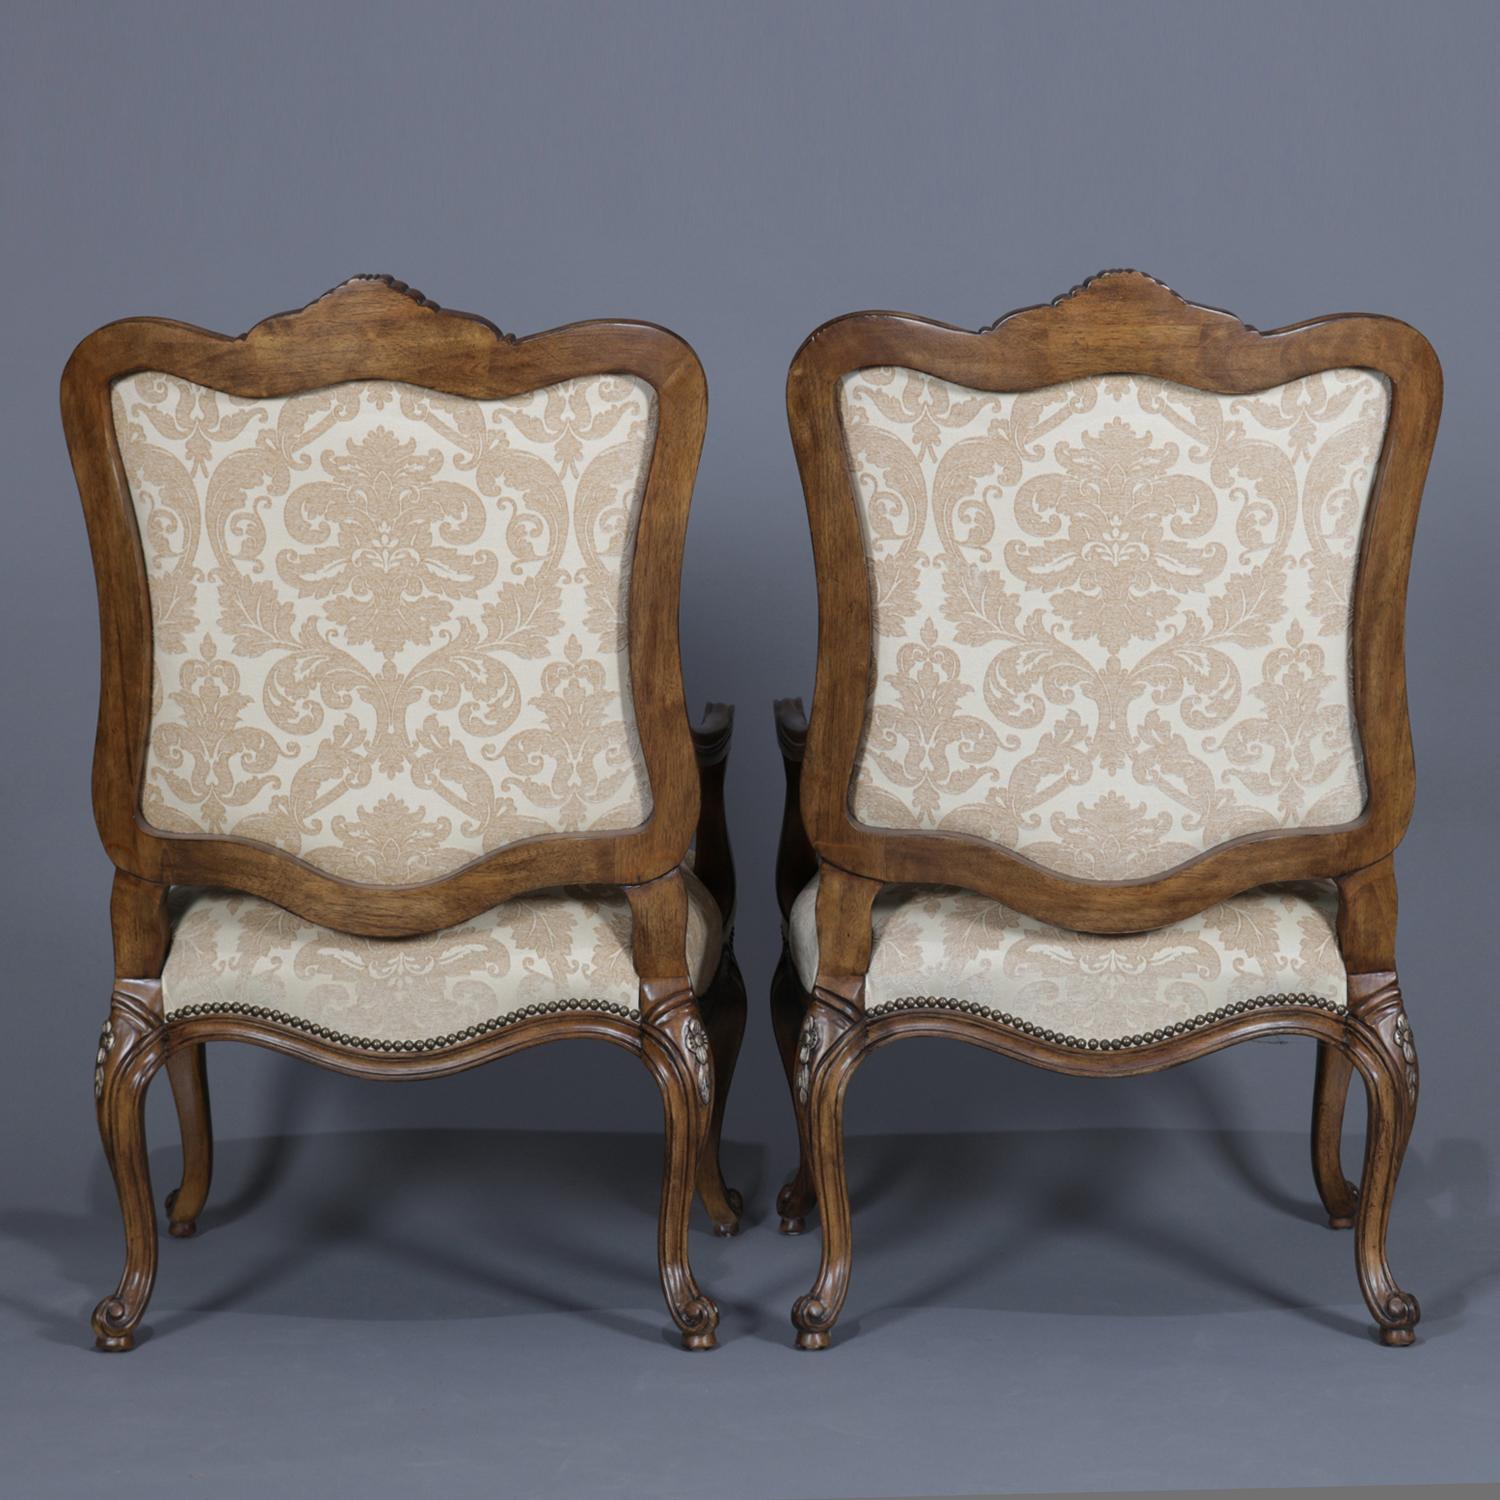 20th Century Pair of French Louis XV Style Carved and Gilt Mahogany Fauteuil Chairs